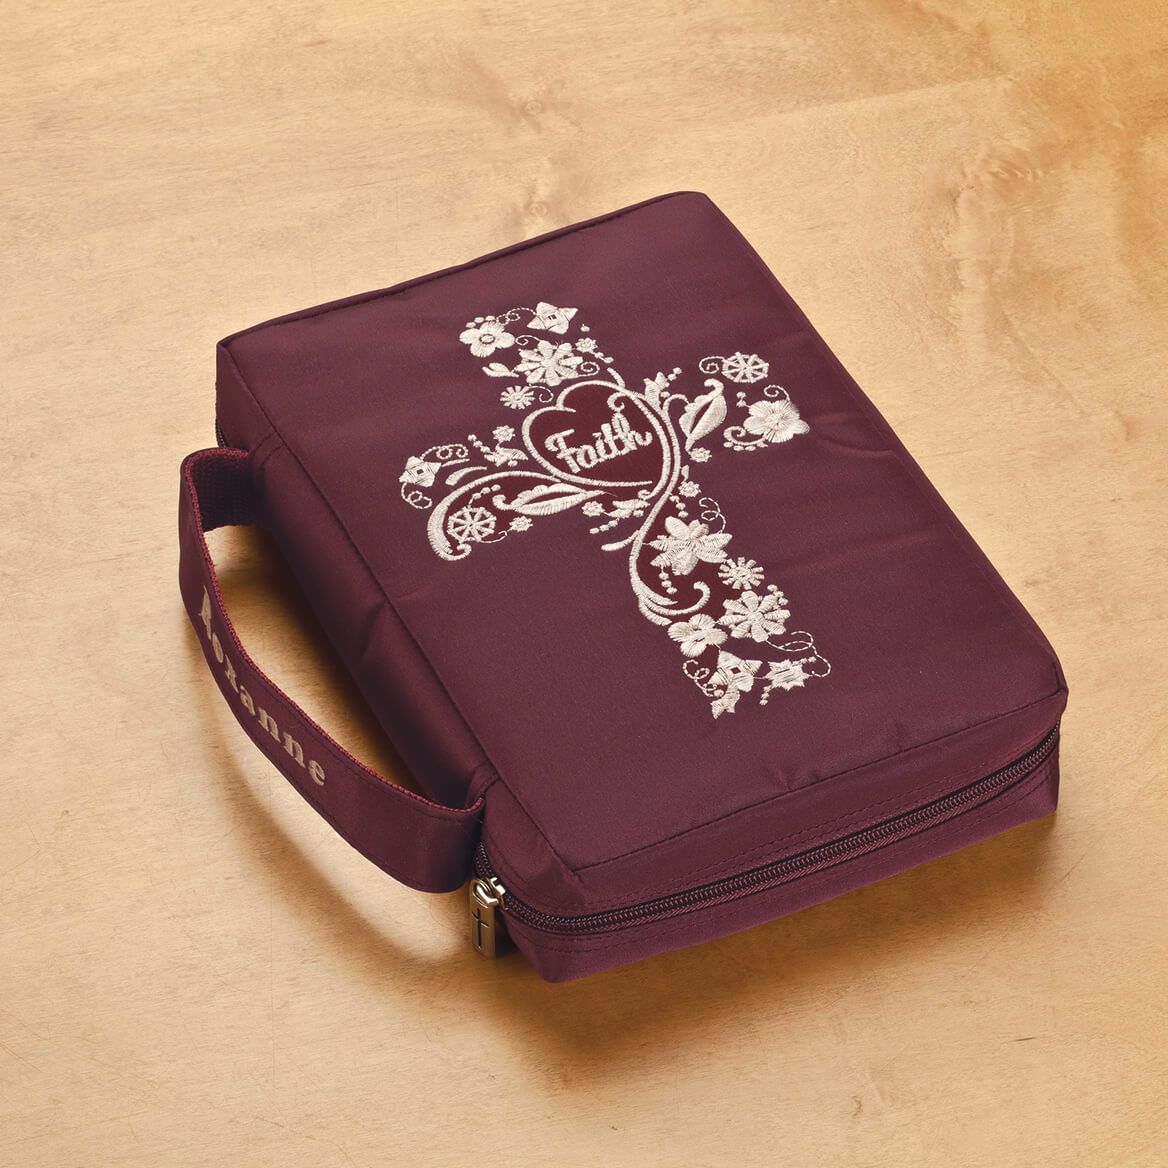 Personalized Faith Bible Cover + '-' + 360915